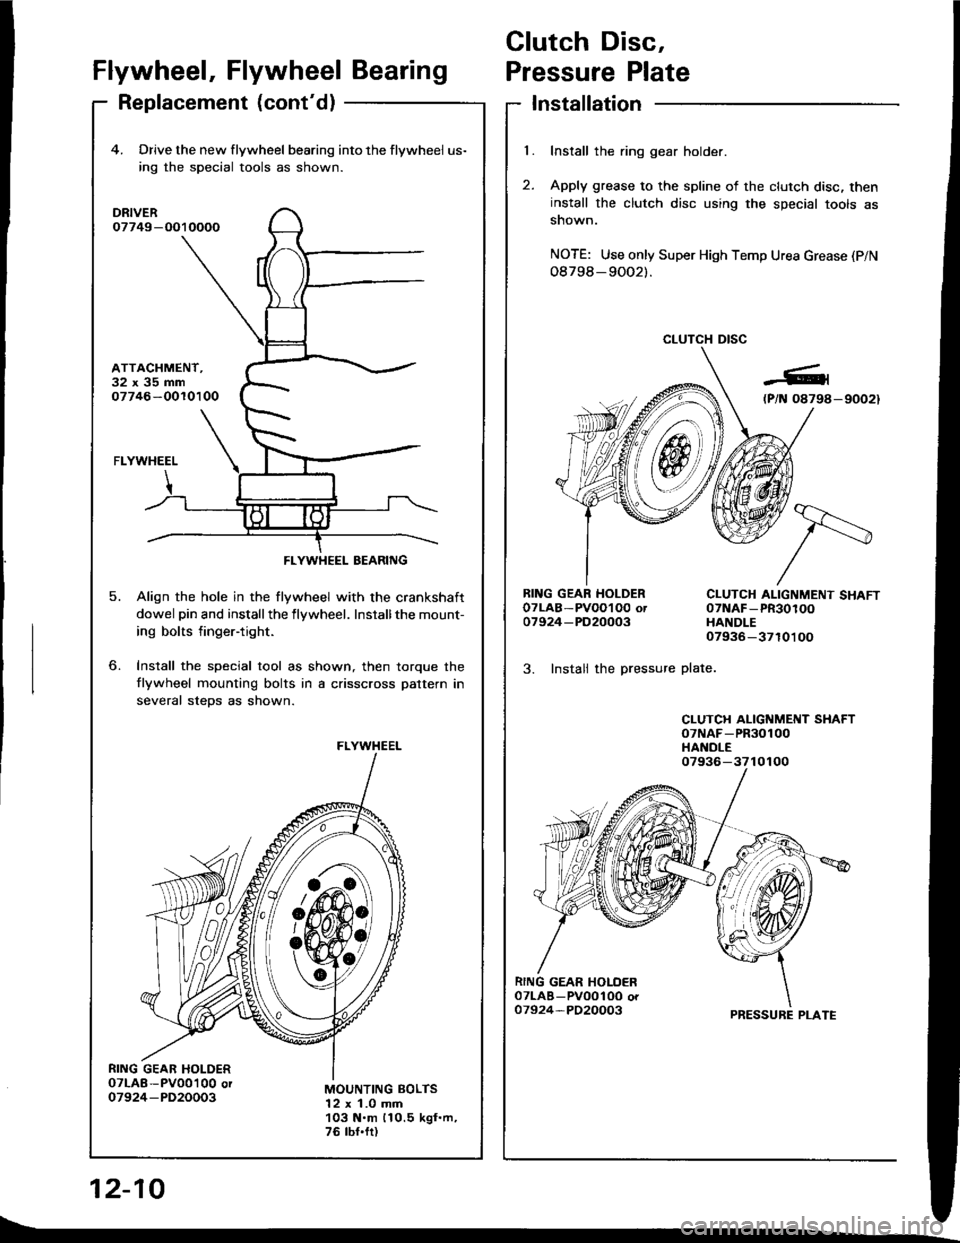 ACURA INTEGRA 1994  Service Repair Manual Clutch Disc,
l.
t
Flywheel, Flywheel BearingPressure Plate
Replacement (contd)Installation
Install the ring gear holder.
Apply grease to the spline of the clutch disc, theninstall the clutch disc usi